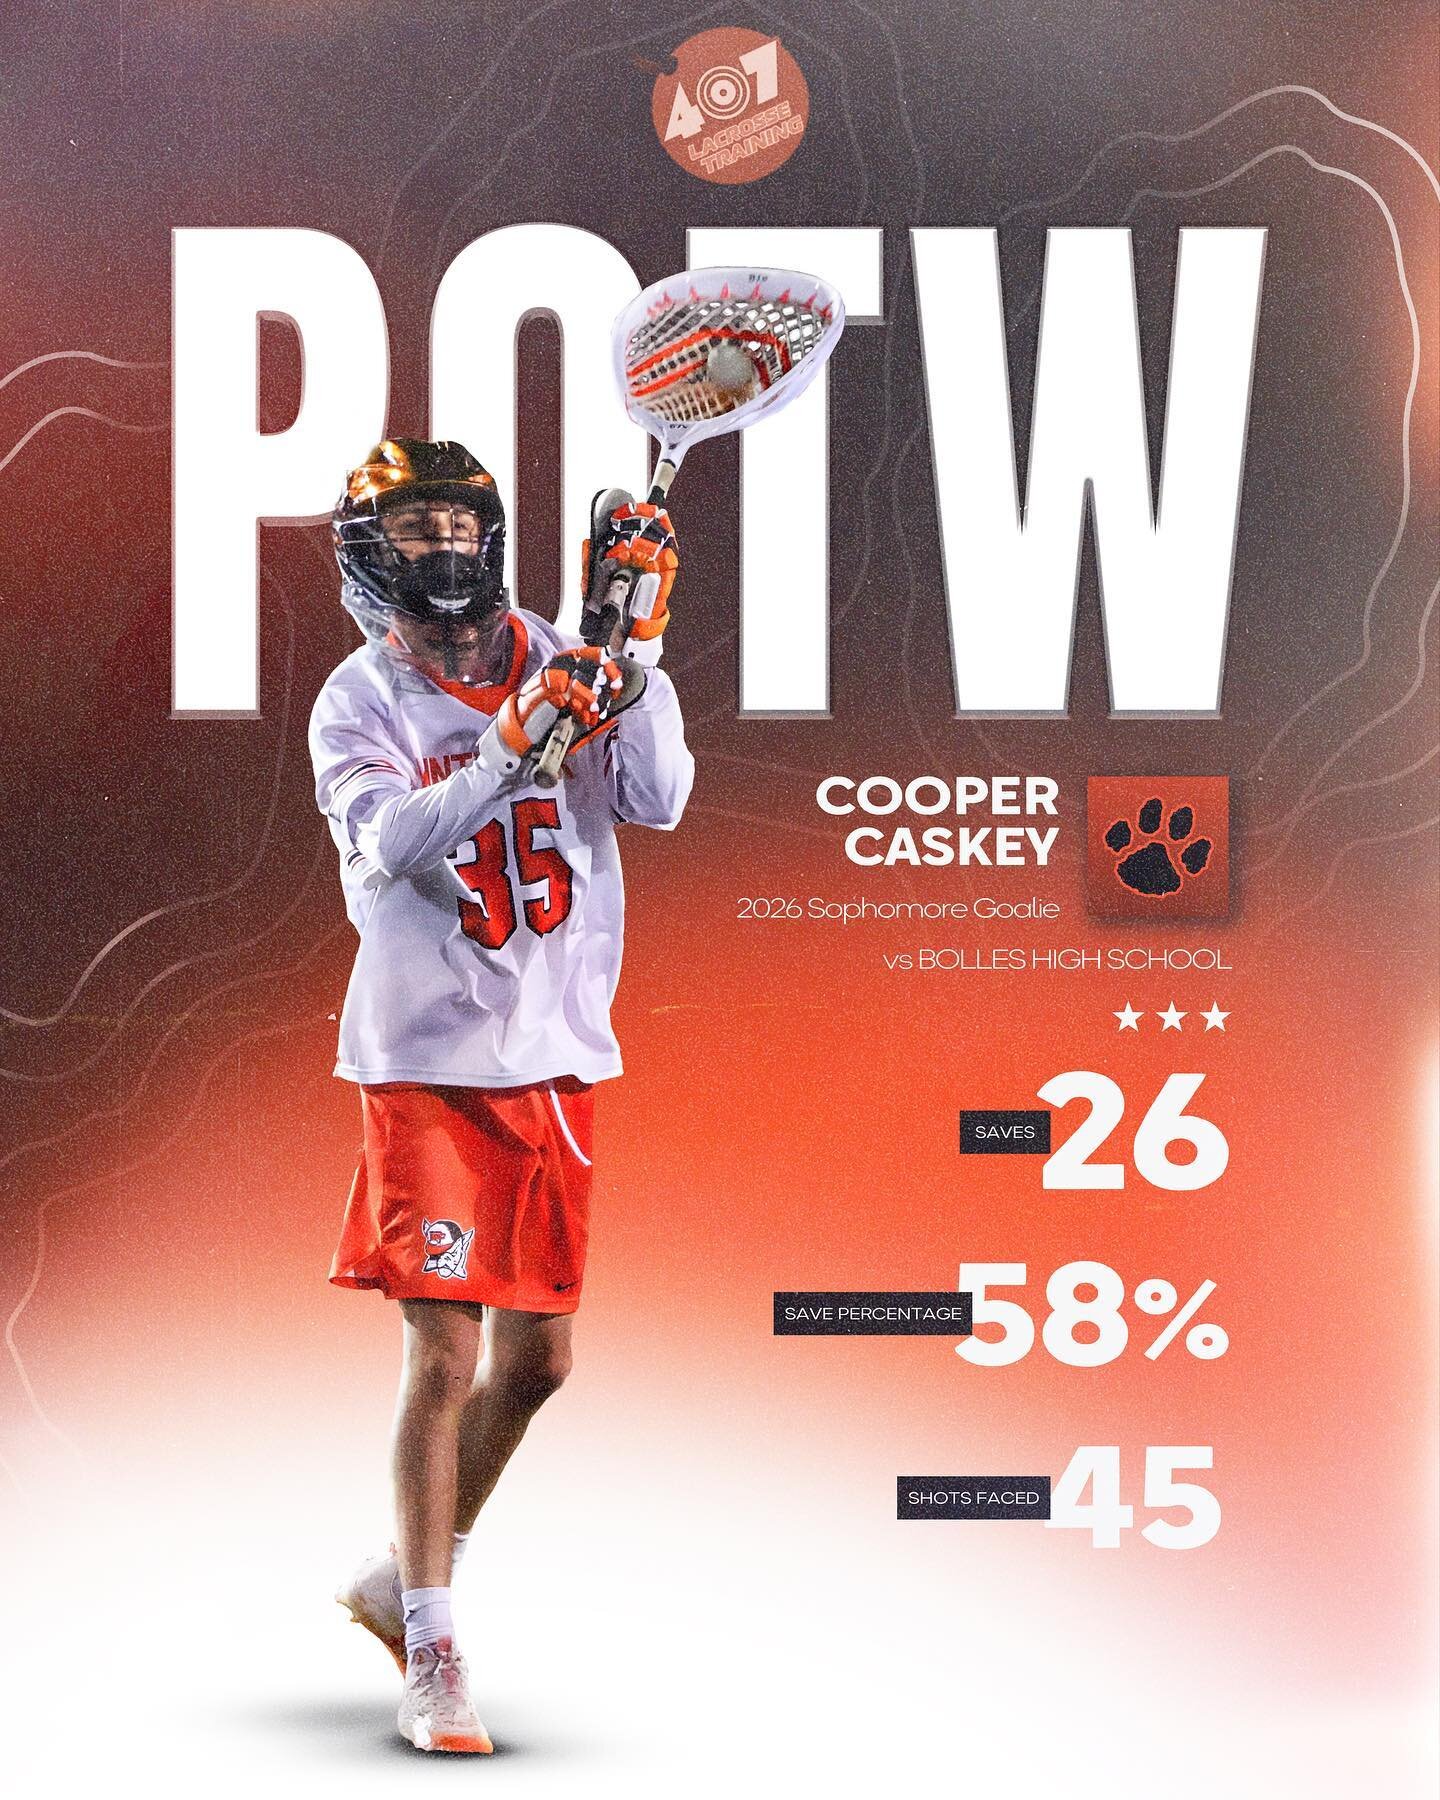 Congratulations to Winter Park&rsquo;s finest @ccaskey35 for winning 407 Lacrosse HS POTW 3 with 26 saves versus Bolles last week! Caskey has been standing on his head all year and we&rsquo;re excited to see how far he can take this very talented Win